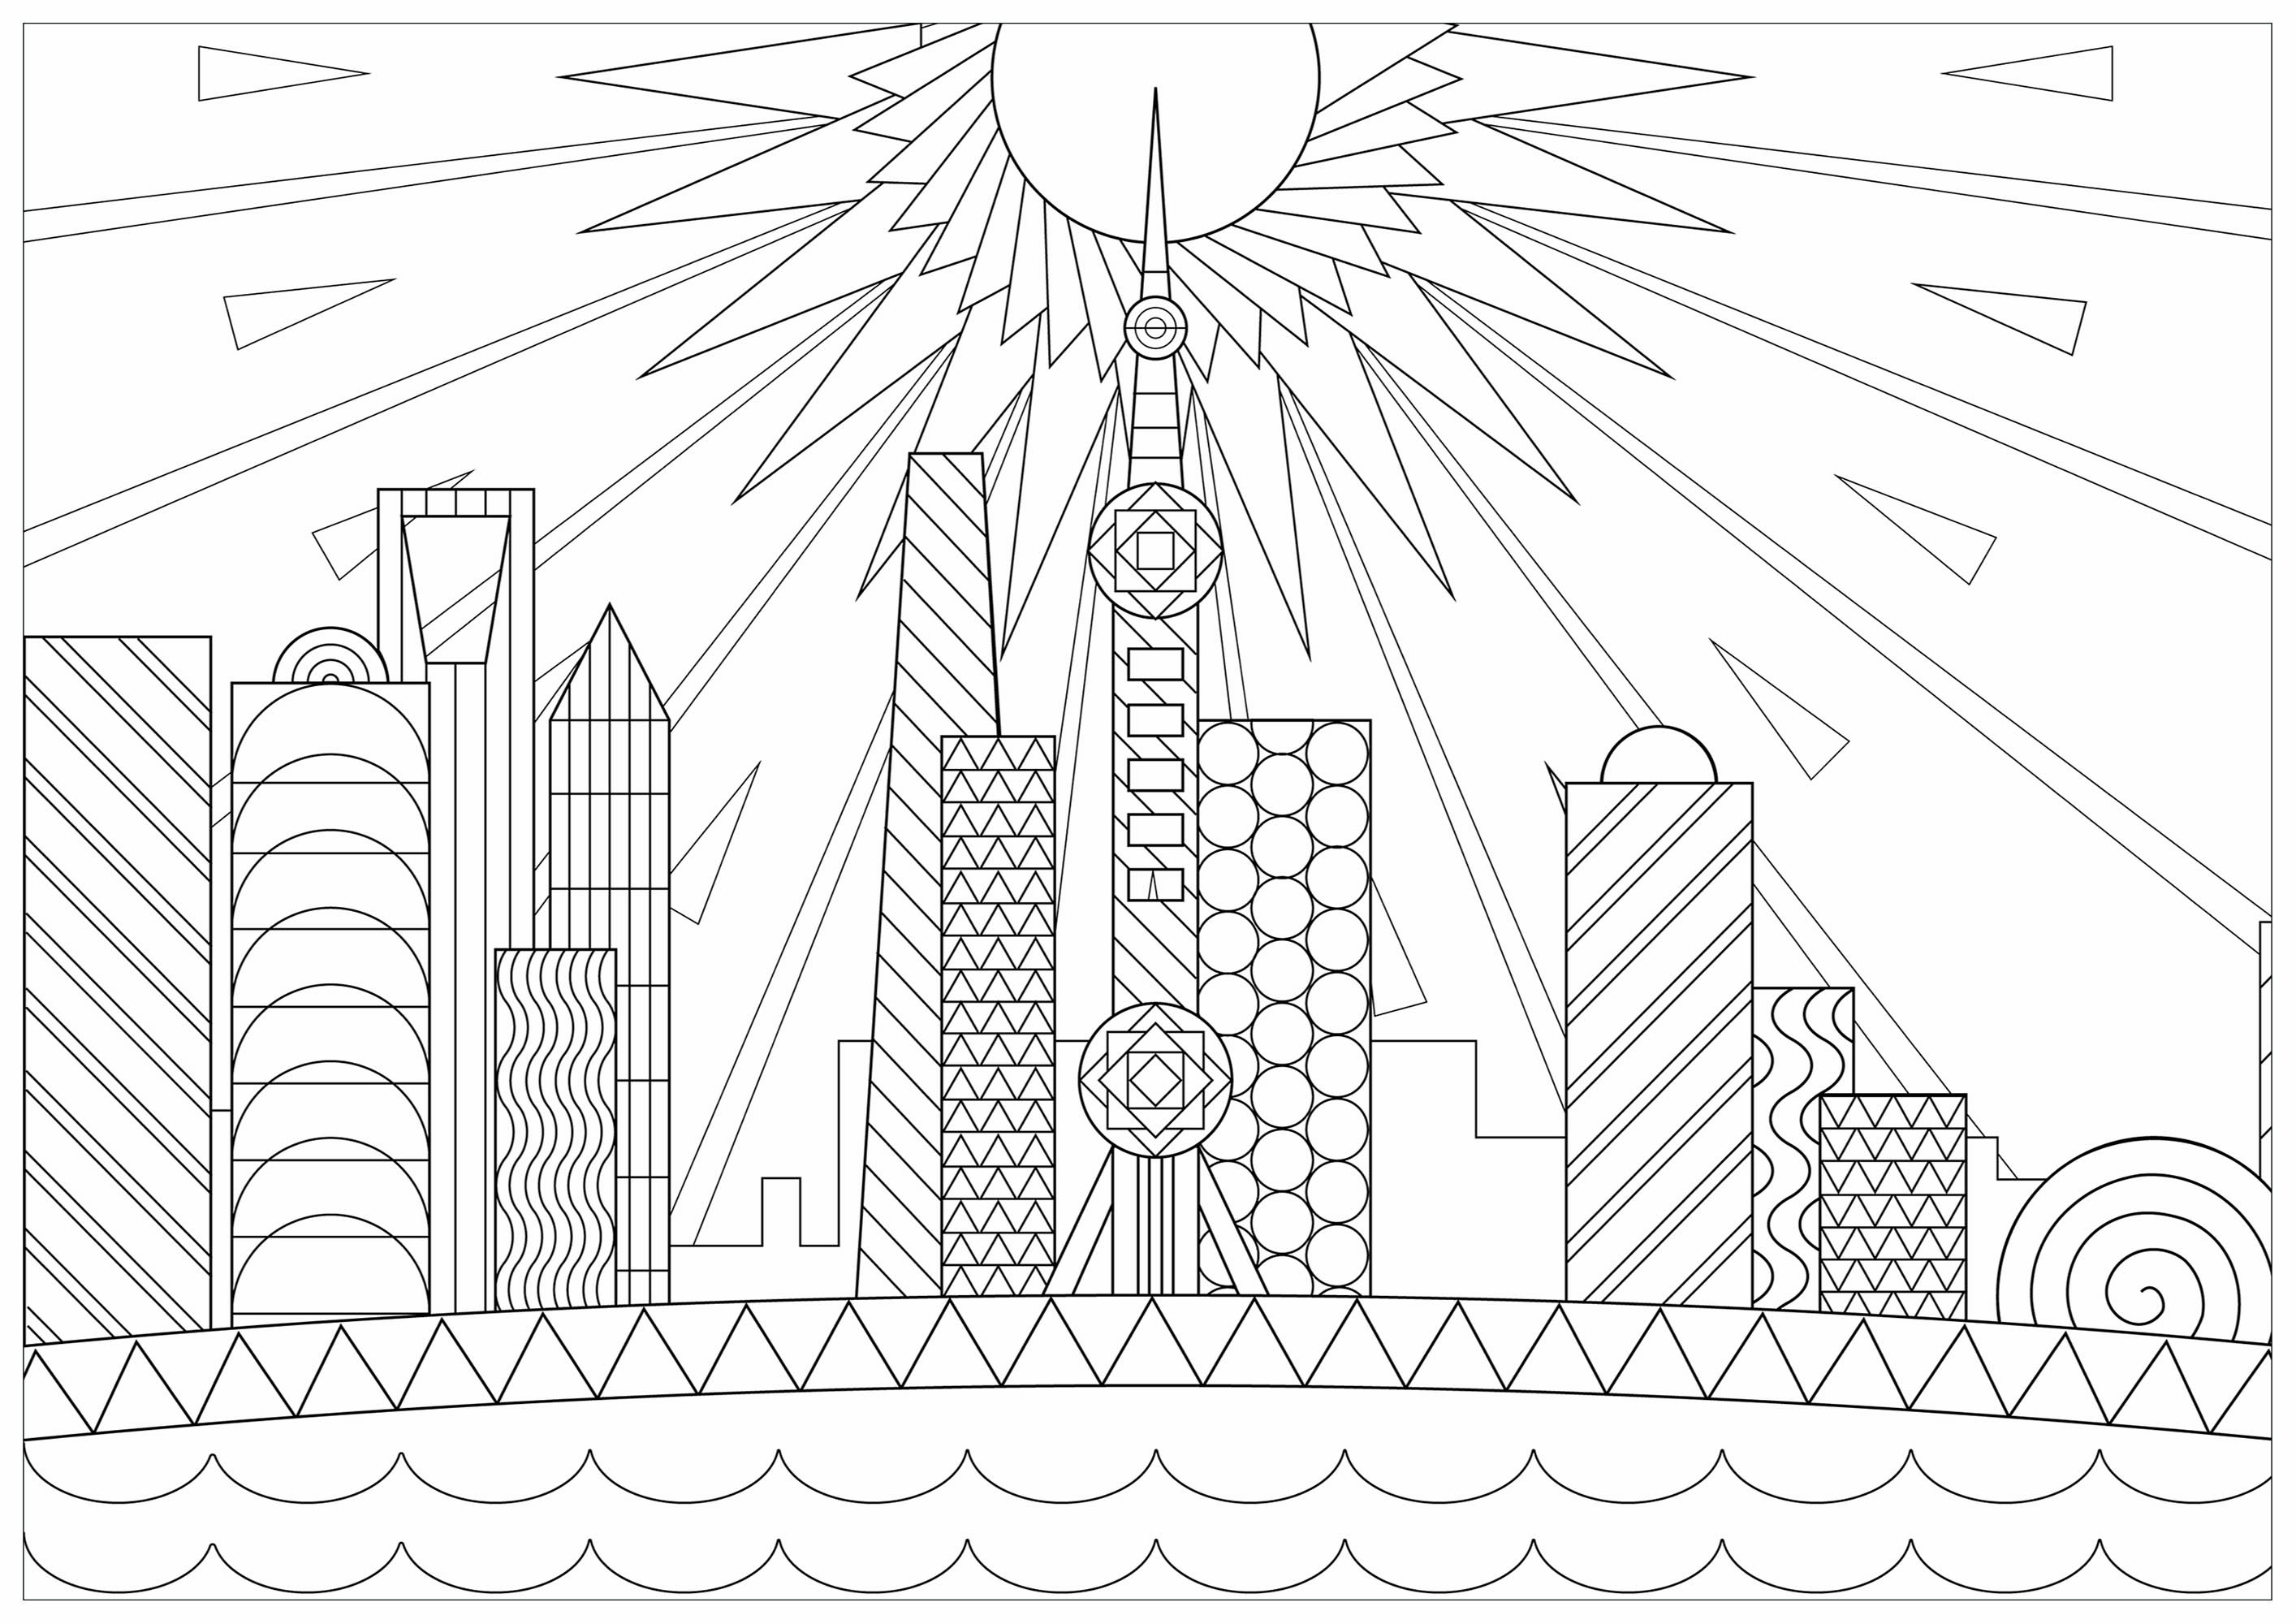 Shanghai is China's largest city by population and the world's second most populous. Color this beautiful view of the city, with a magnificent sun in the background, Artist : Davy